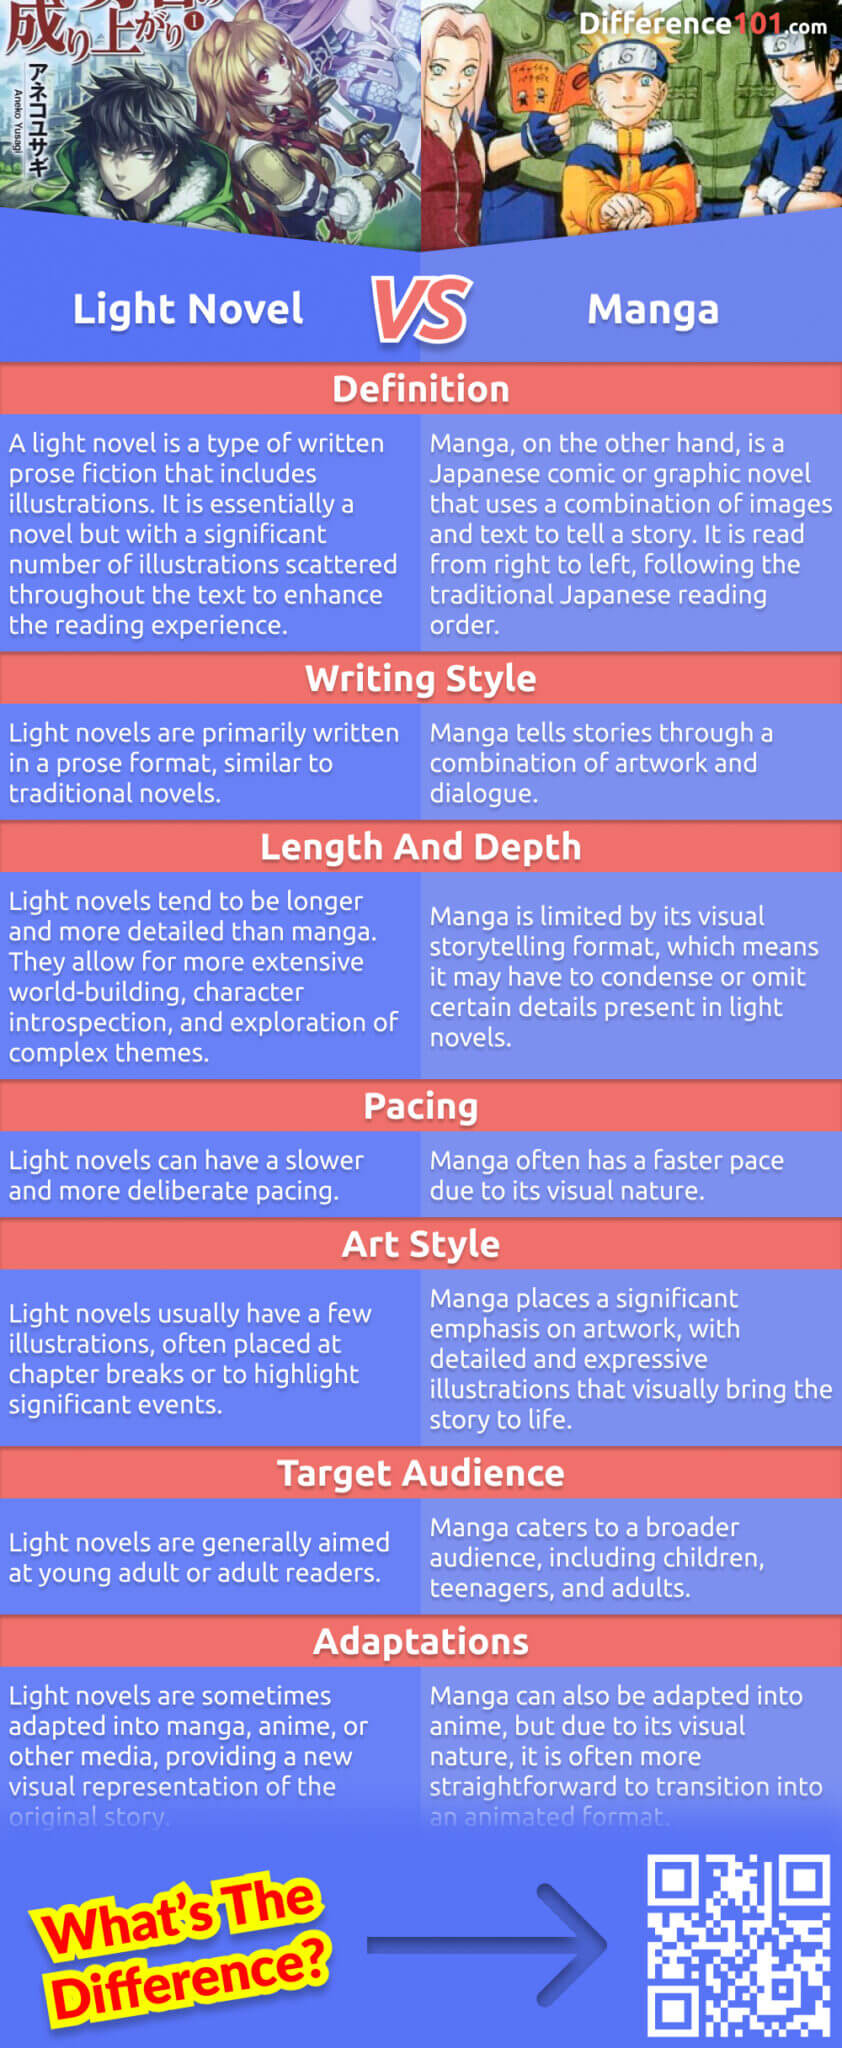 Discover everything you need to know about the difference between light novels and manga in this comprehensive article. Explore their unique storytelling formats, art styles, and cultural influences. Perfect for anime enthusiasts!